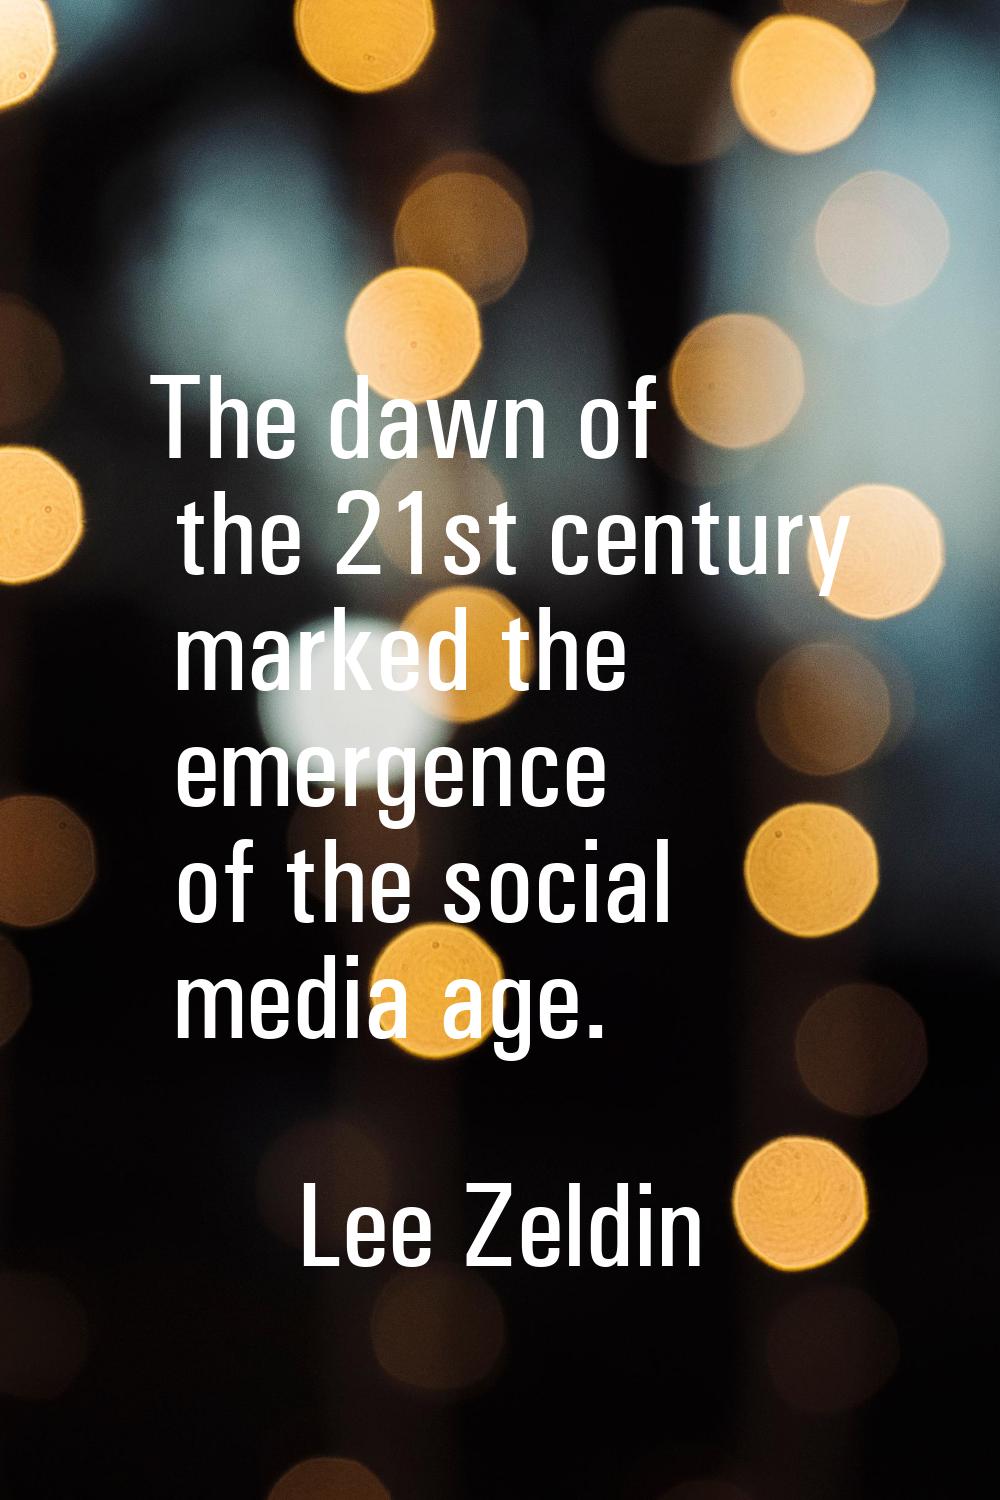 The dawn of the 21st century marked the emergence of the social media age.